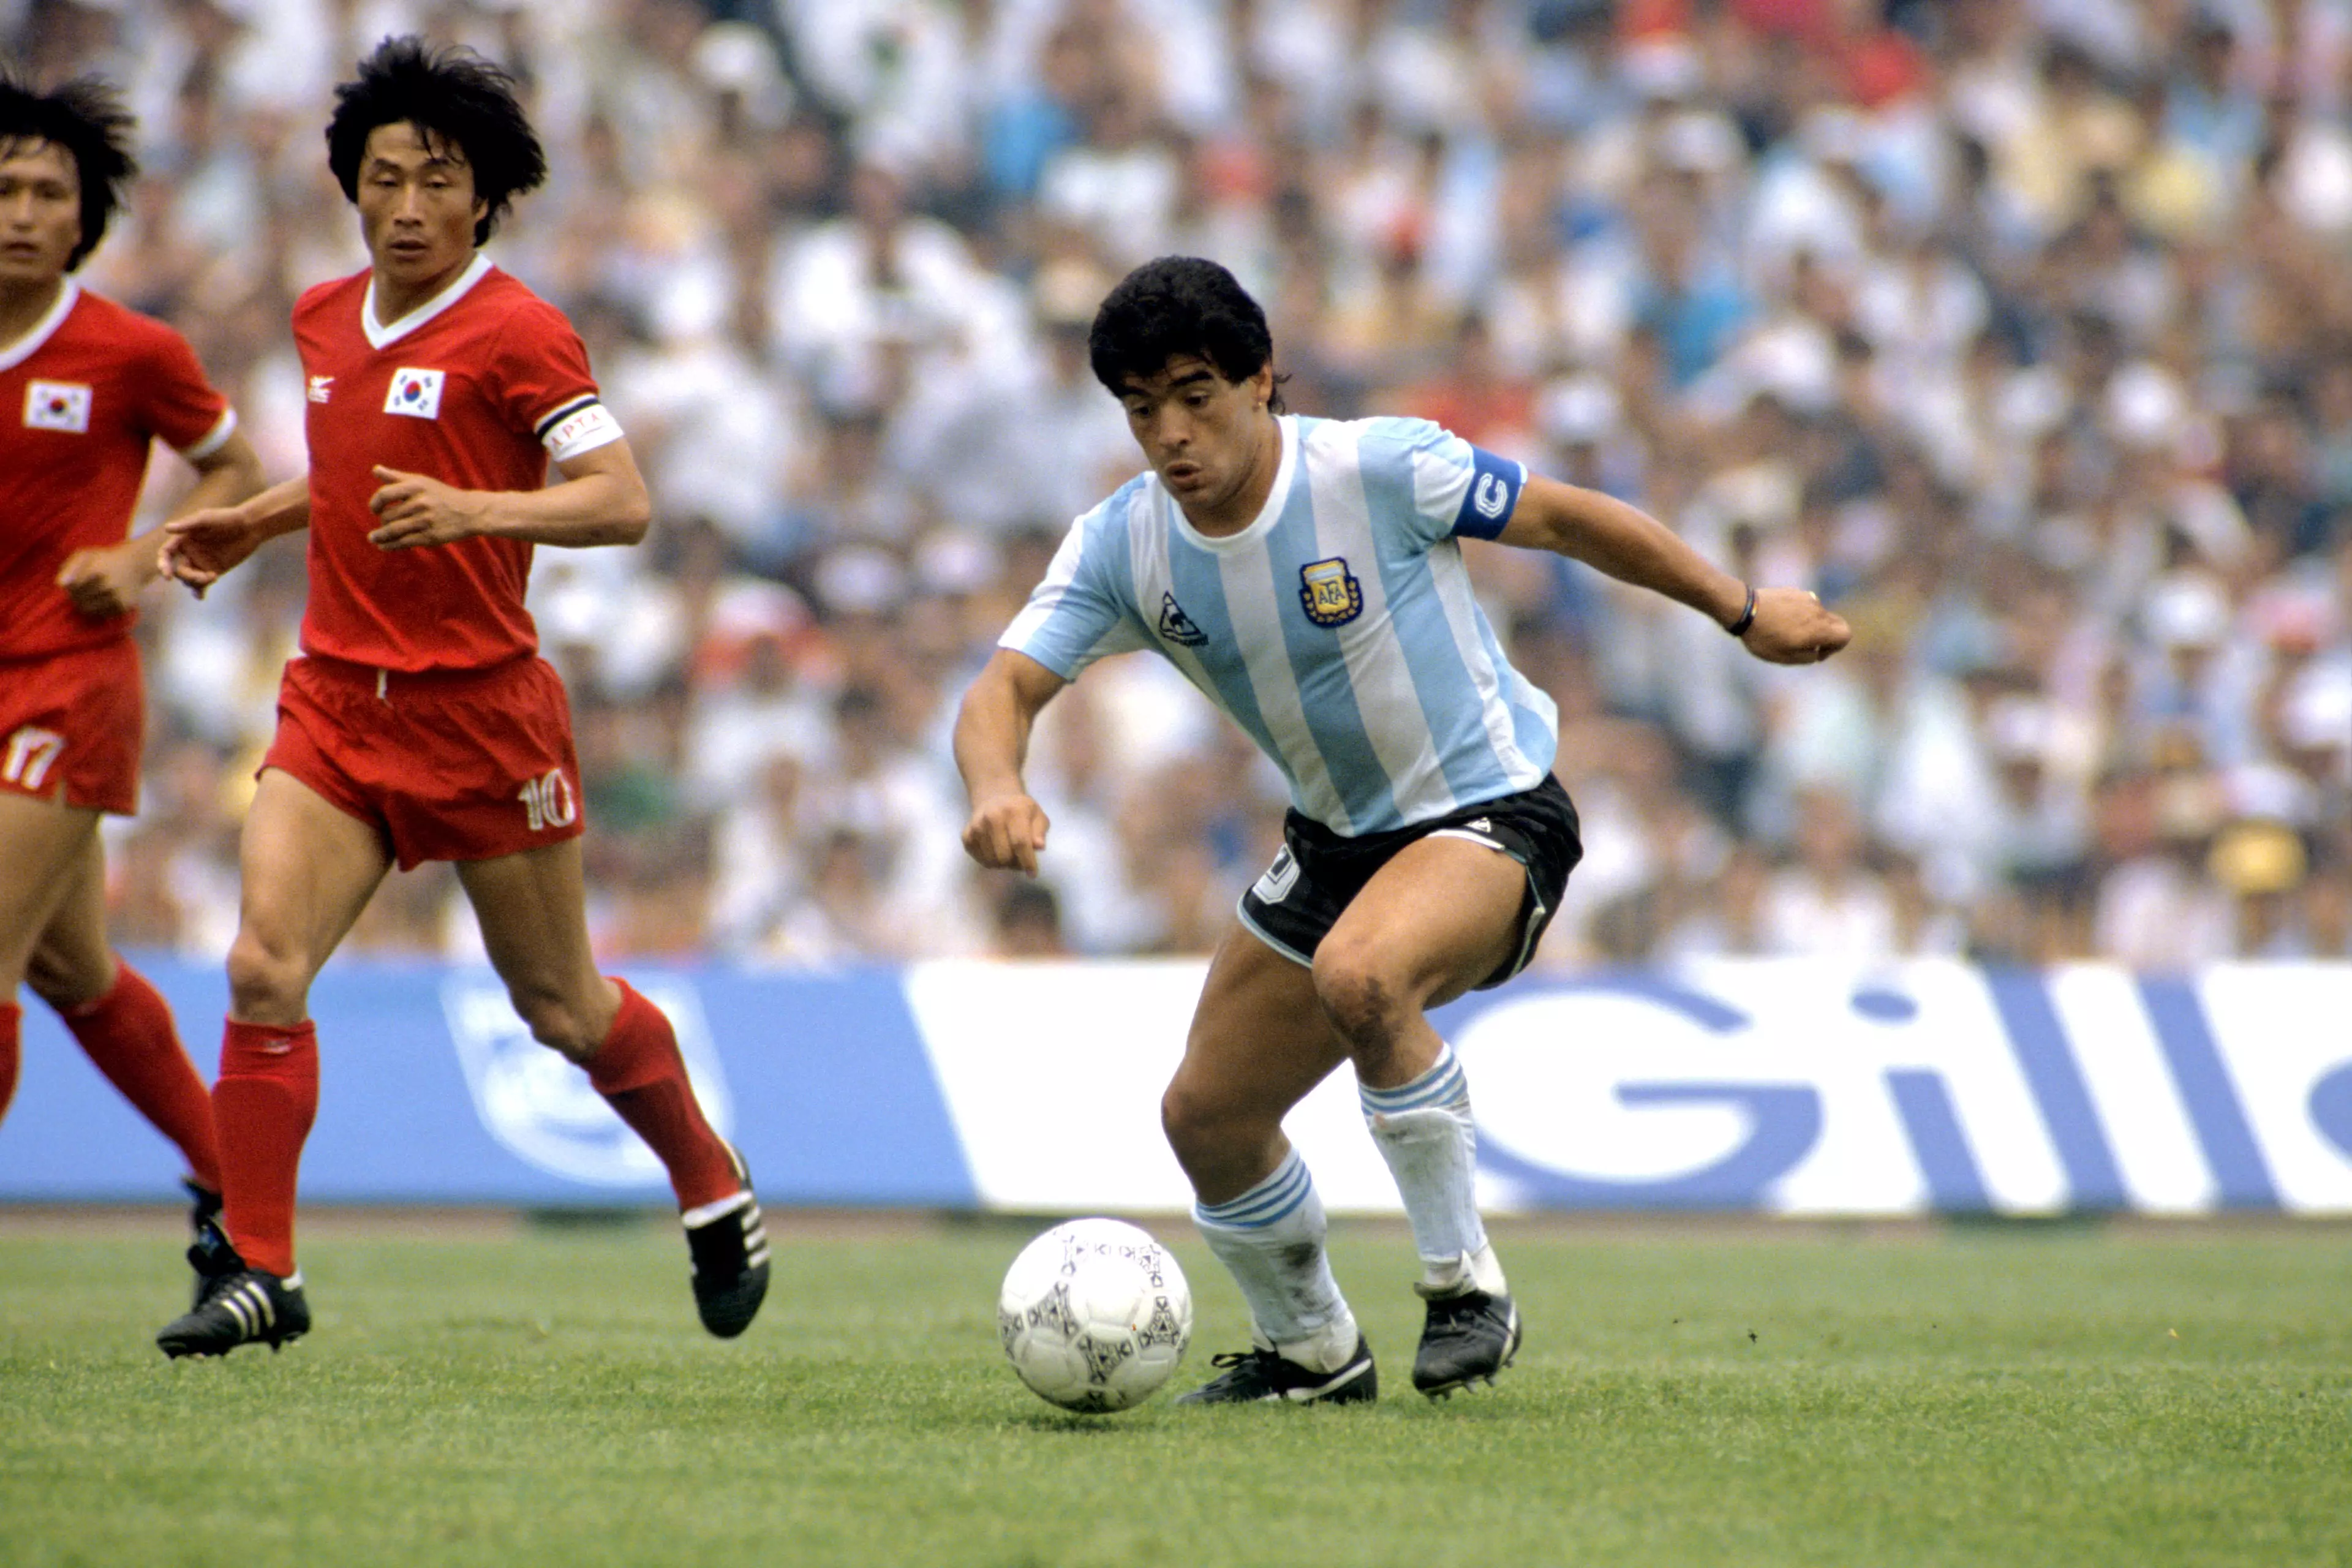 Diego Maradona would also have been ruined by Manchester United, according to Mino Raiola